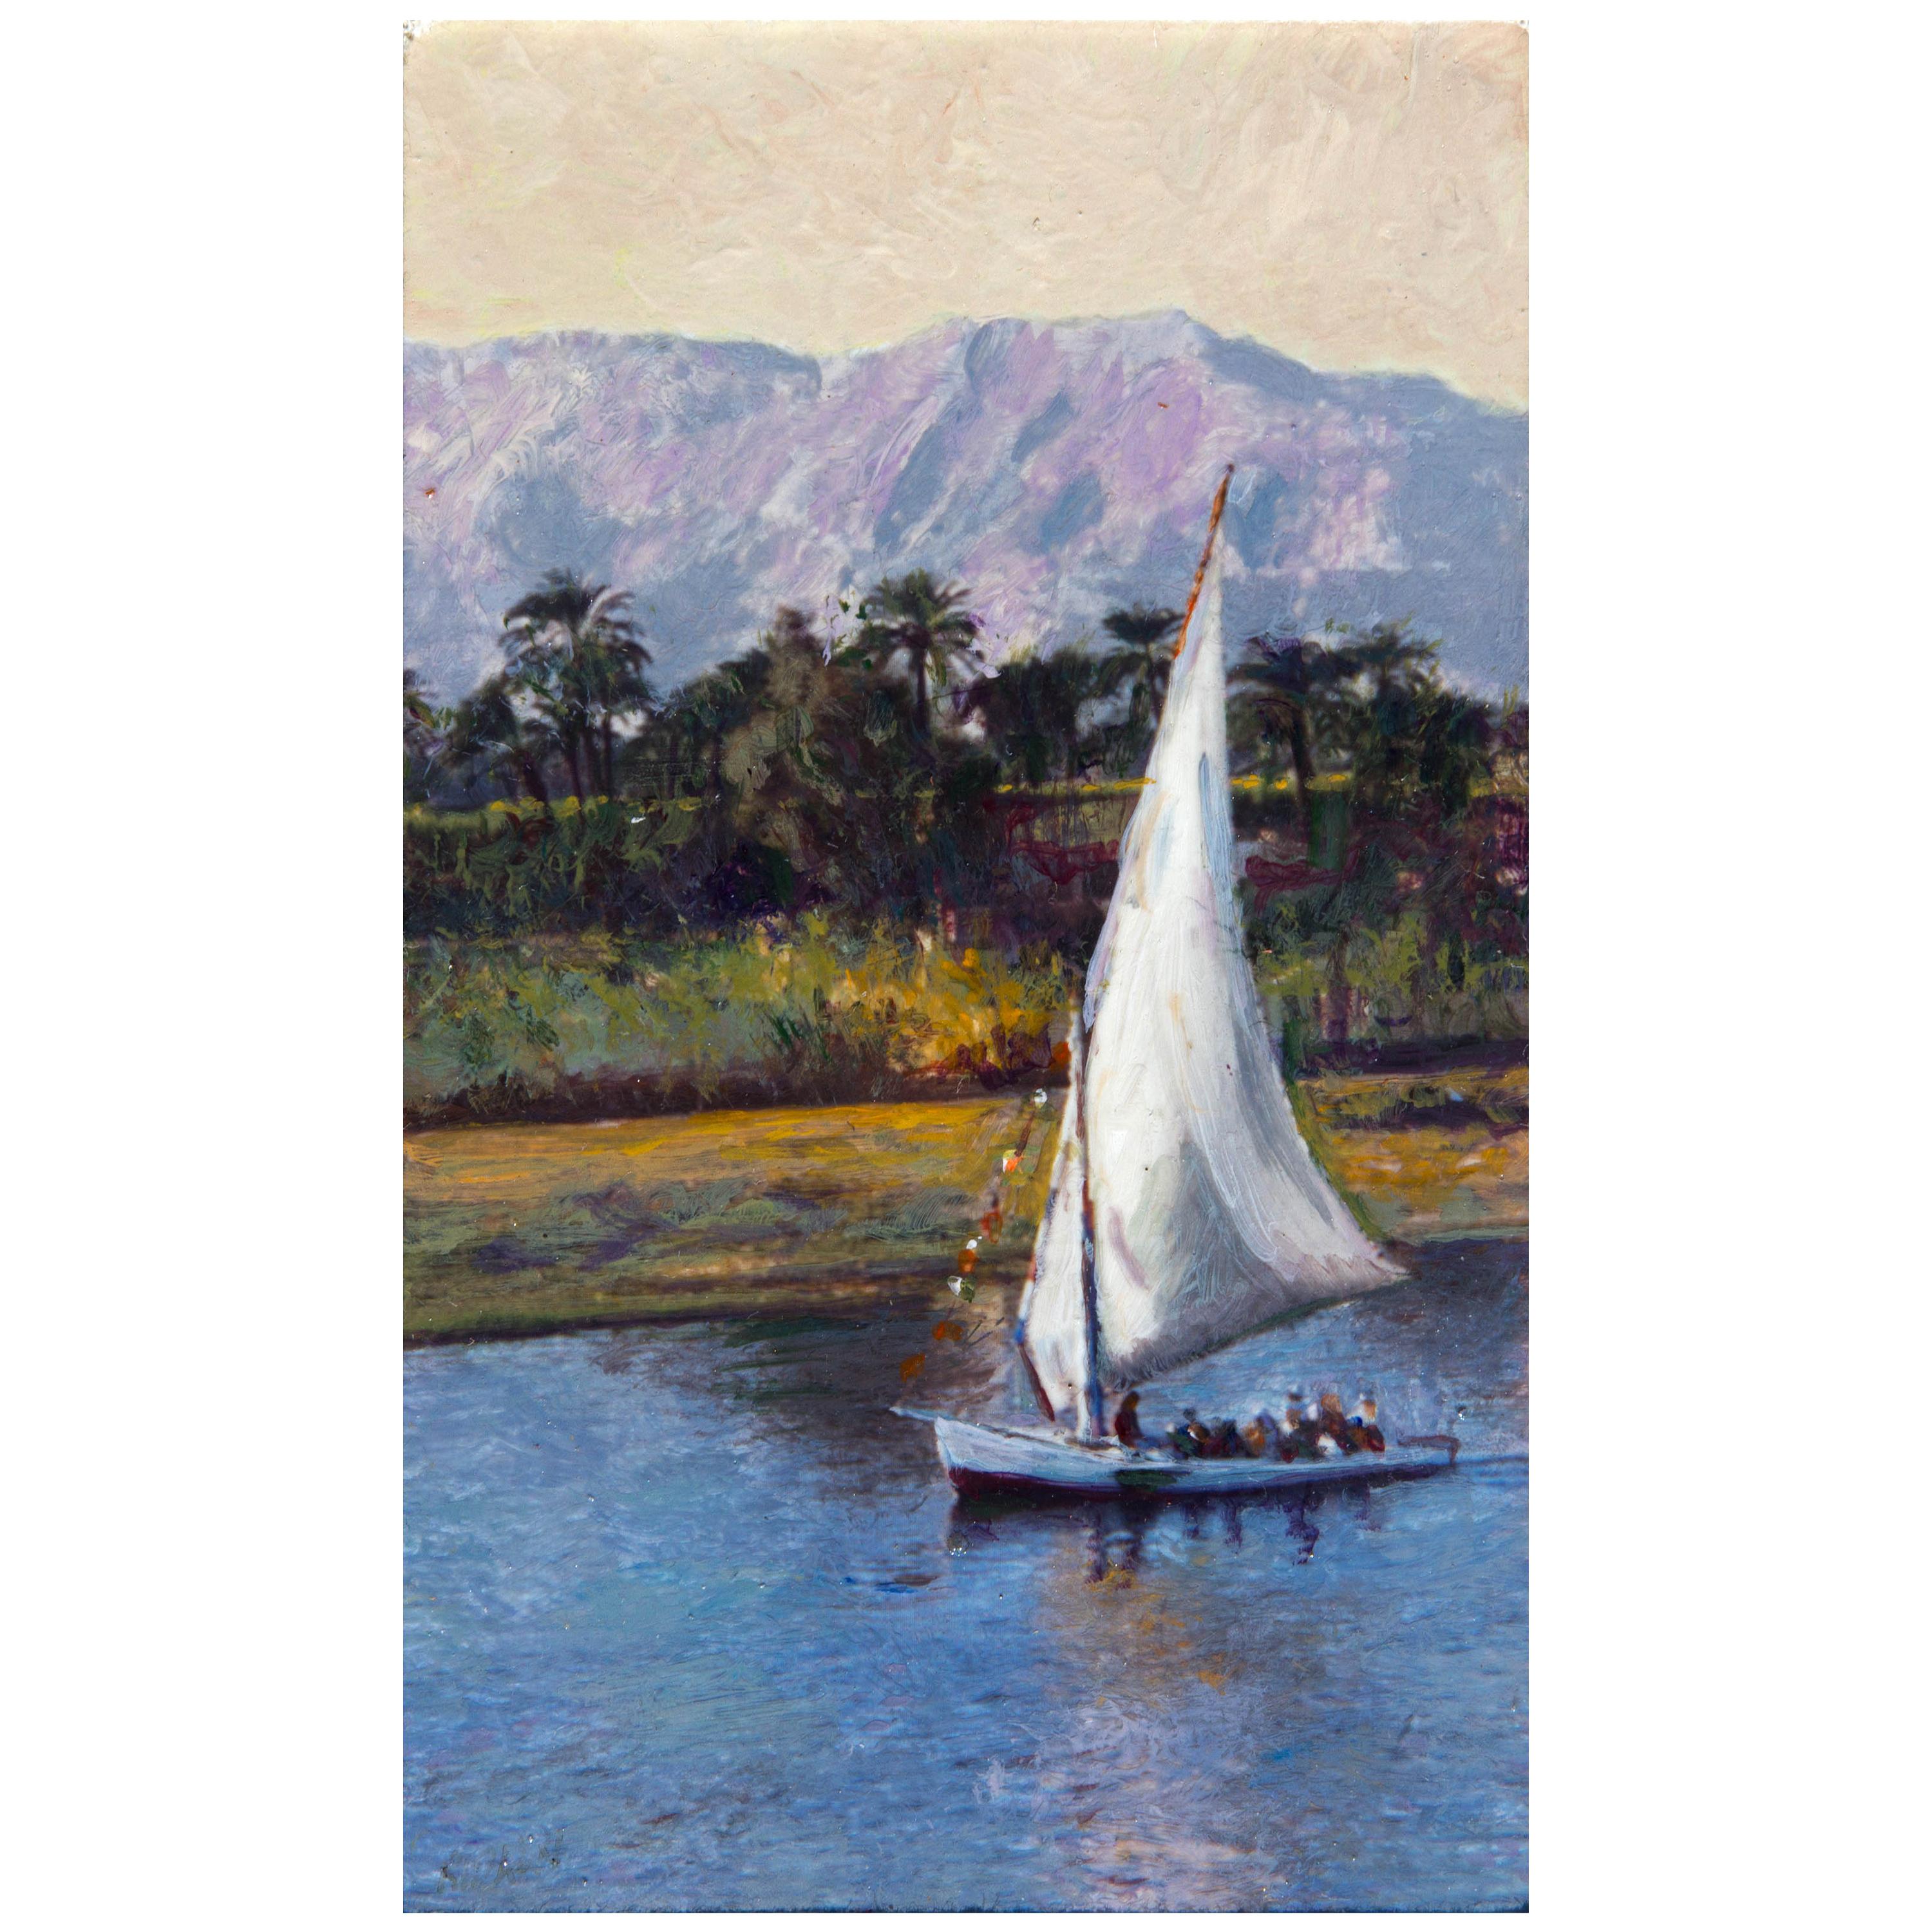 Evening on the Nile River Impressionist Painting 